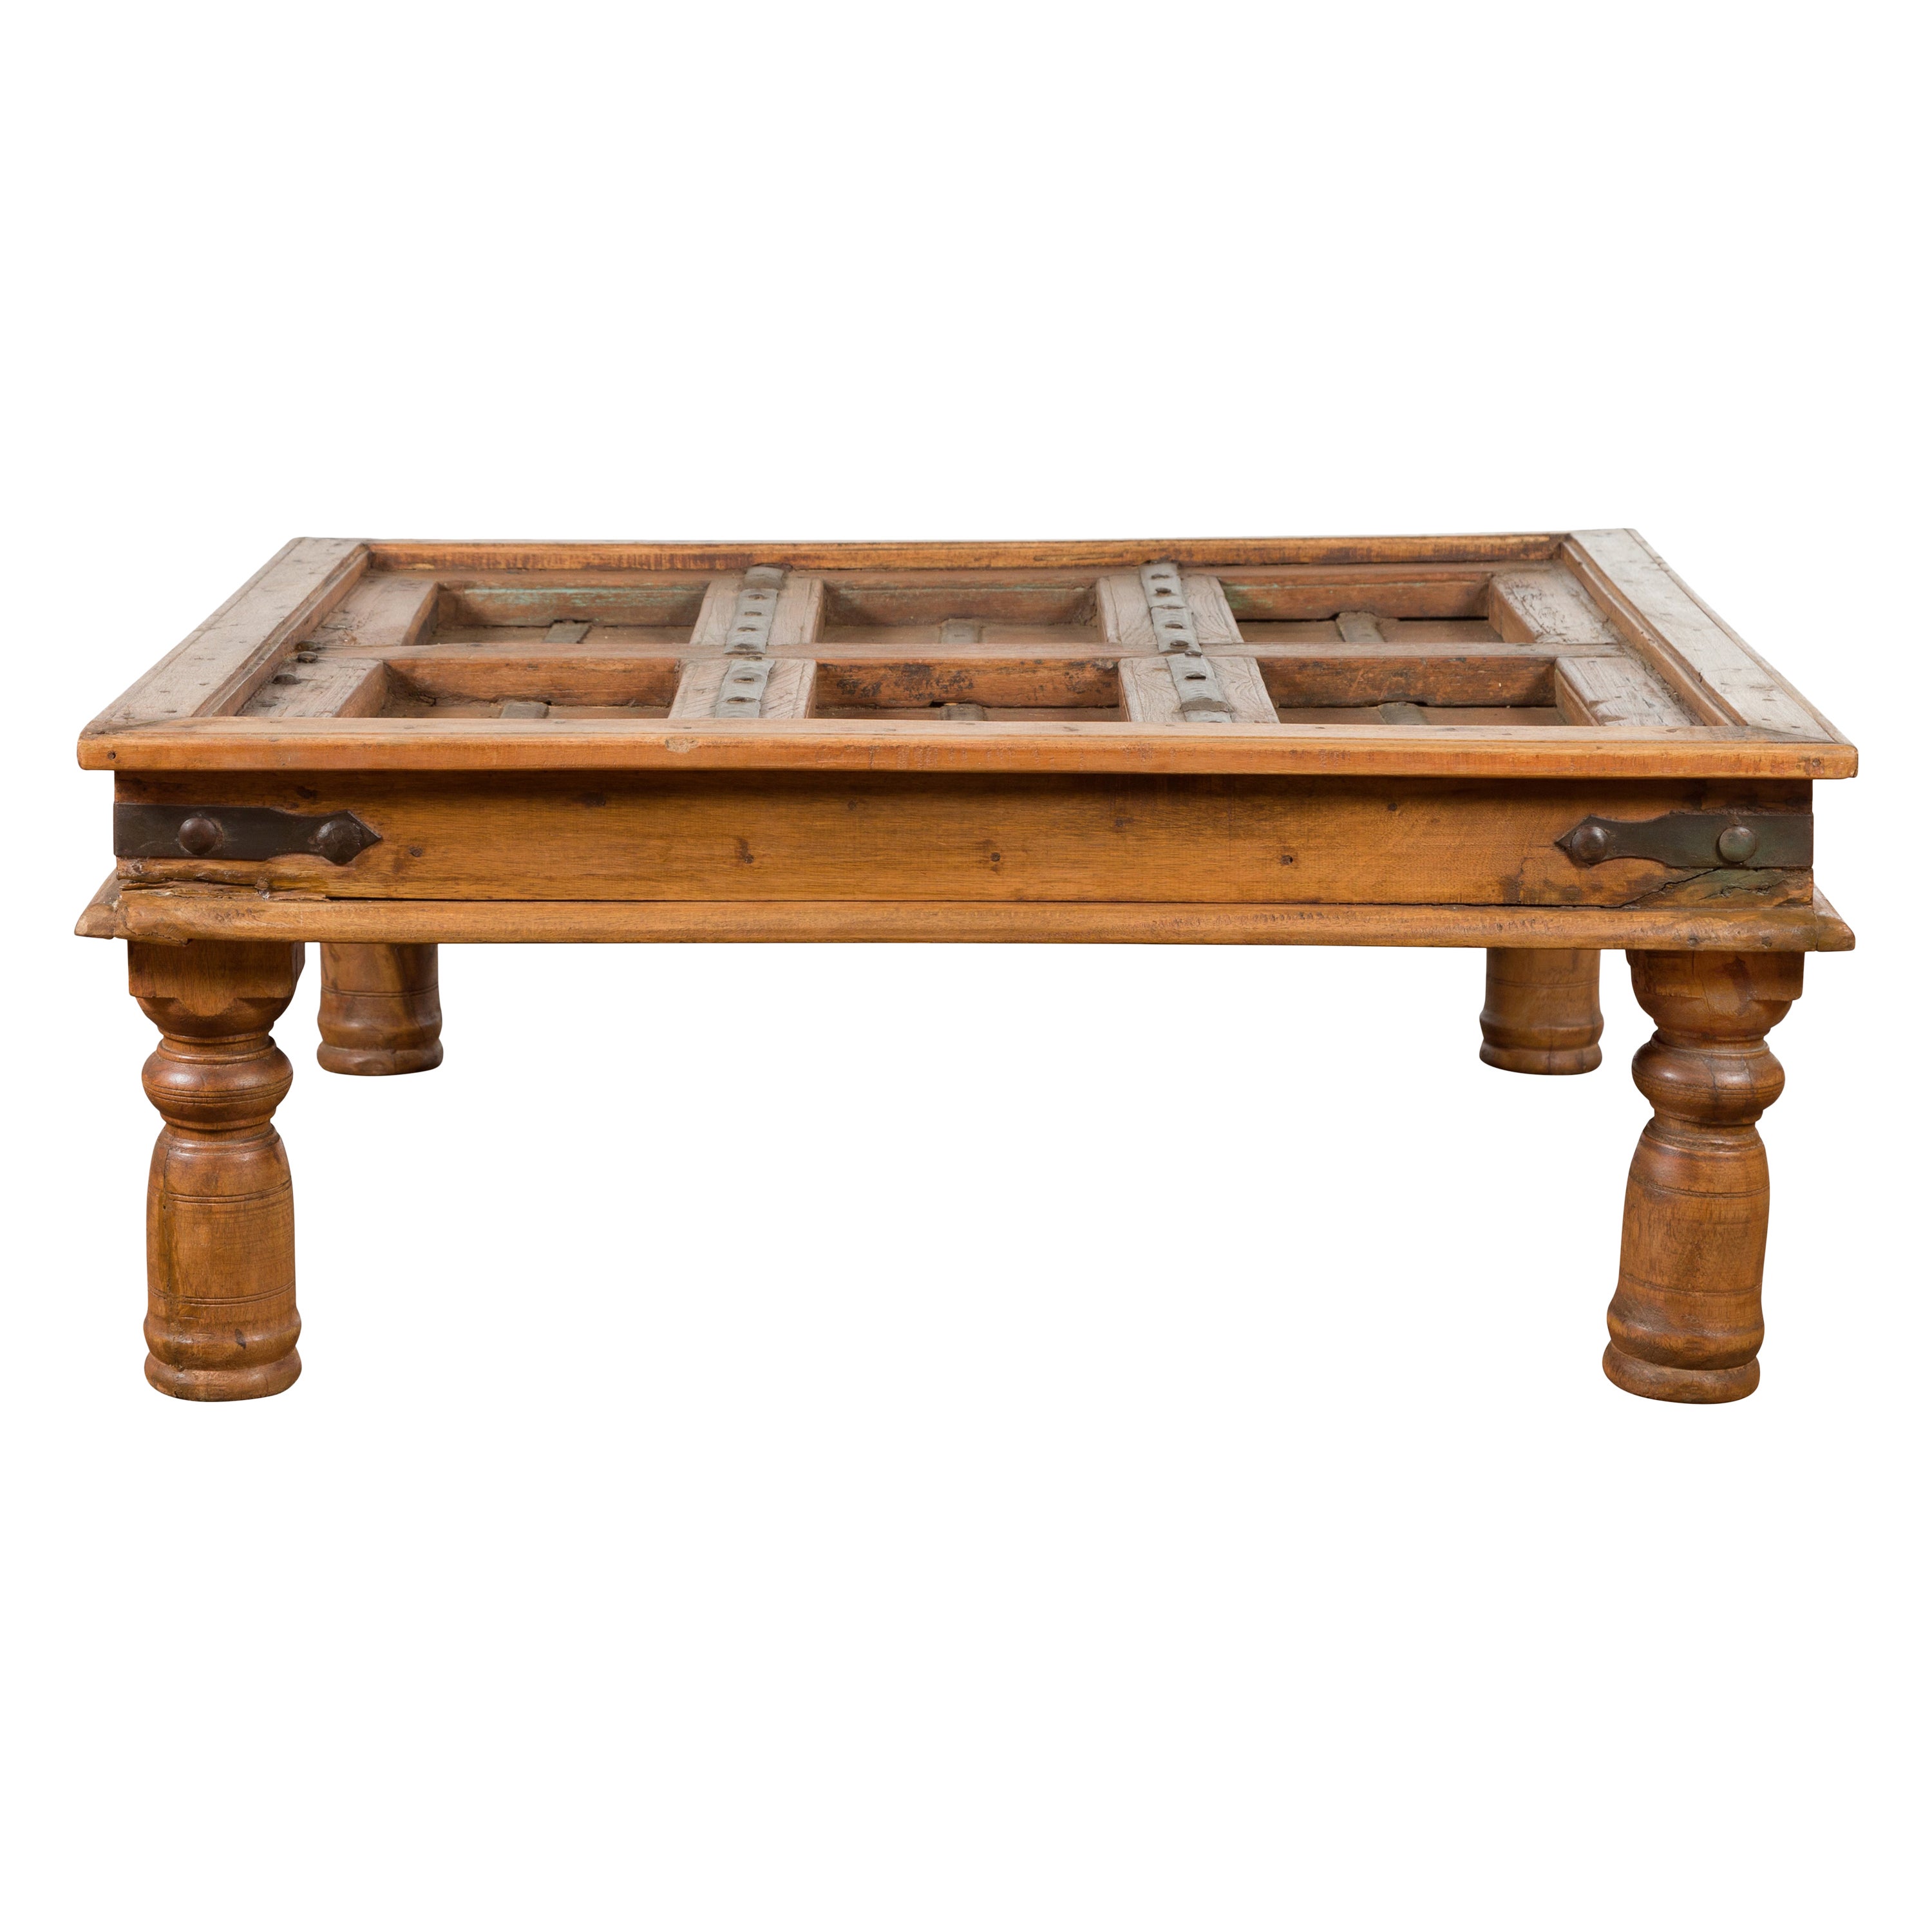 Indian 19th Century Paneled Door with Iron Accents Turned into a Coffee Table